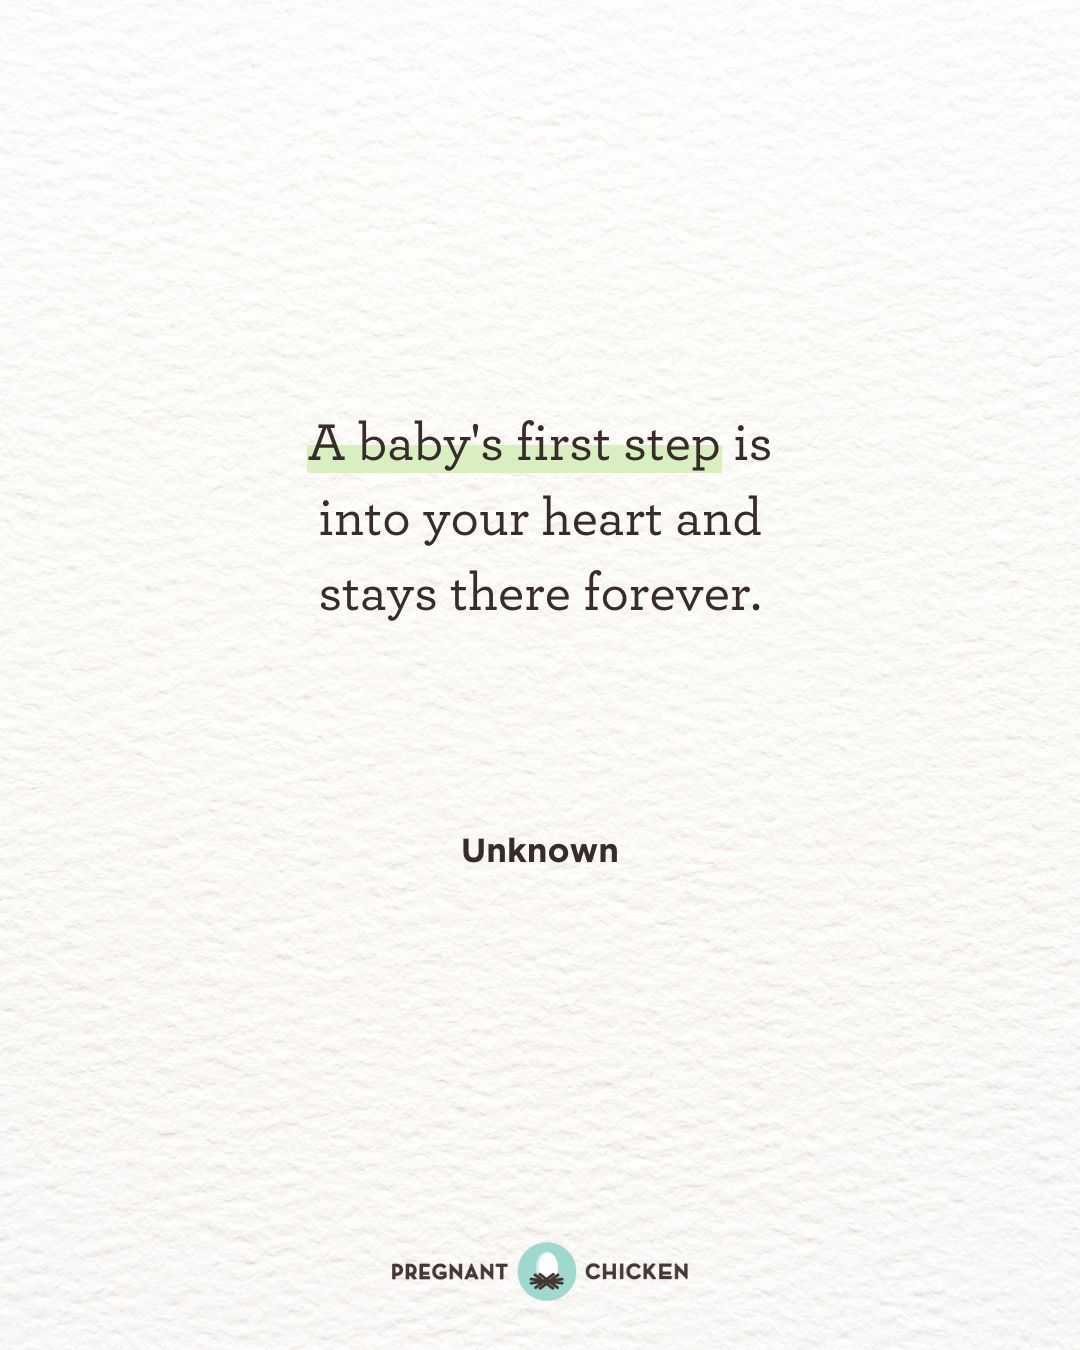 A baby's first step is into your heart and stays there forever.